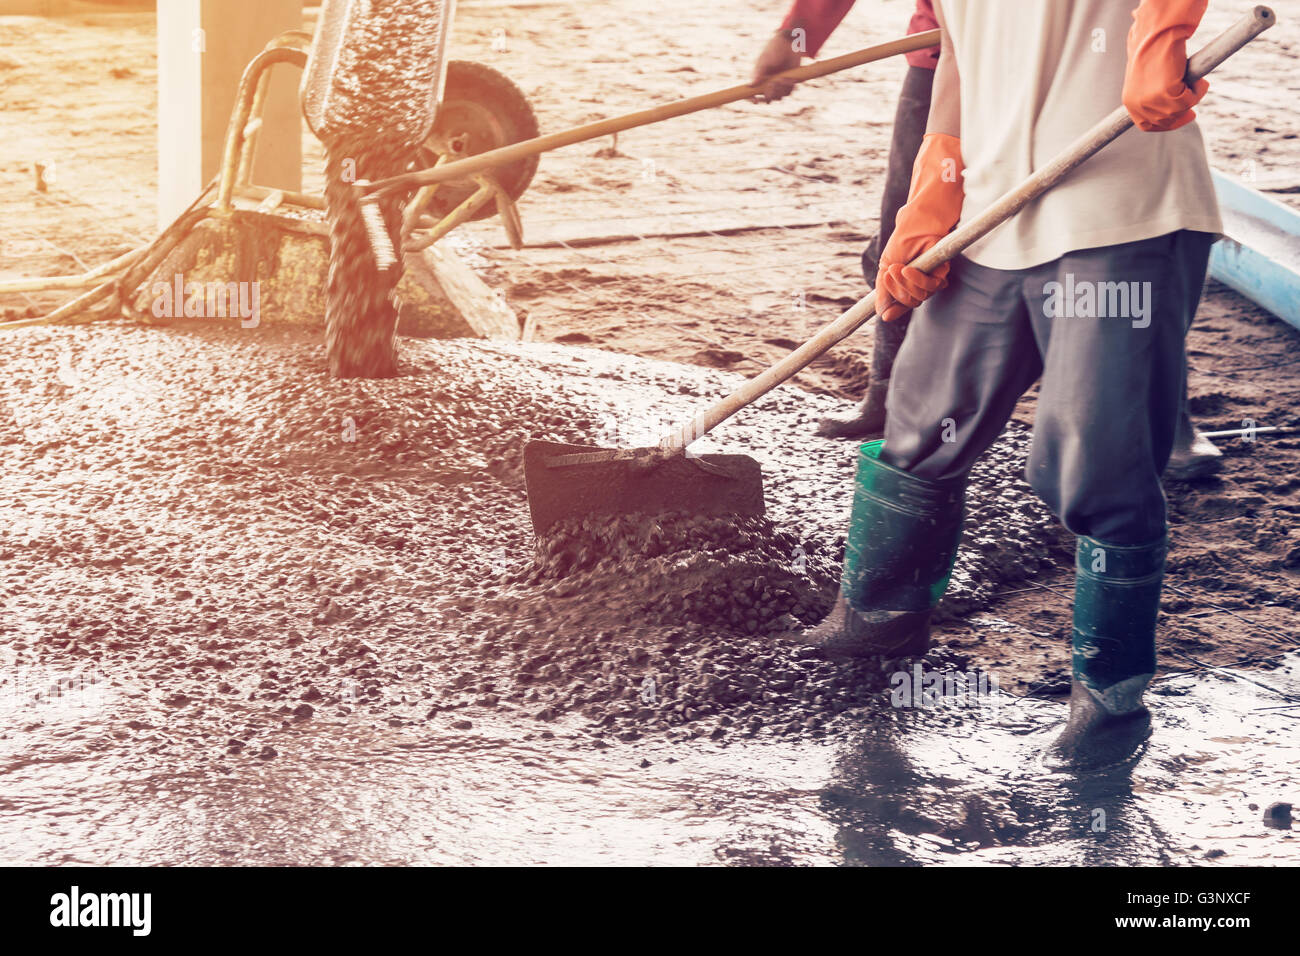 man workers spreading freshly poured concrete mix on building with vintage tone. Stock Photo